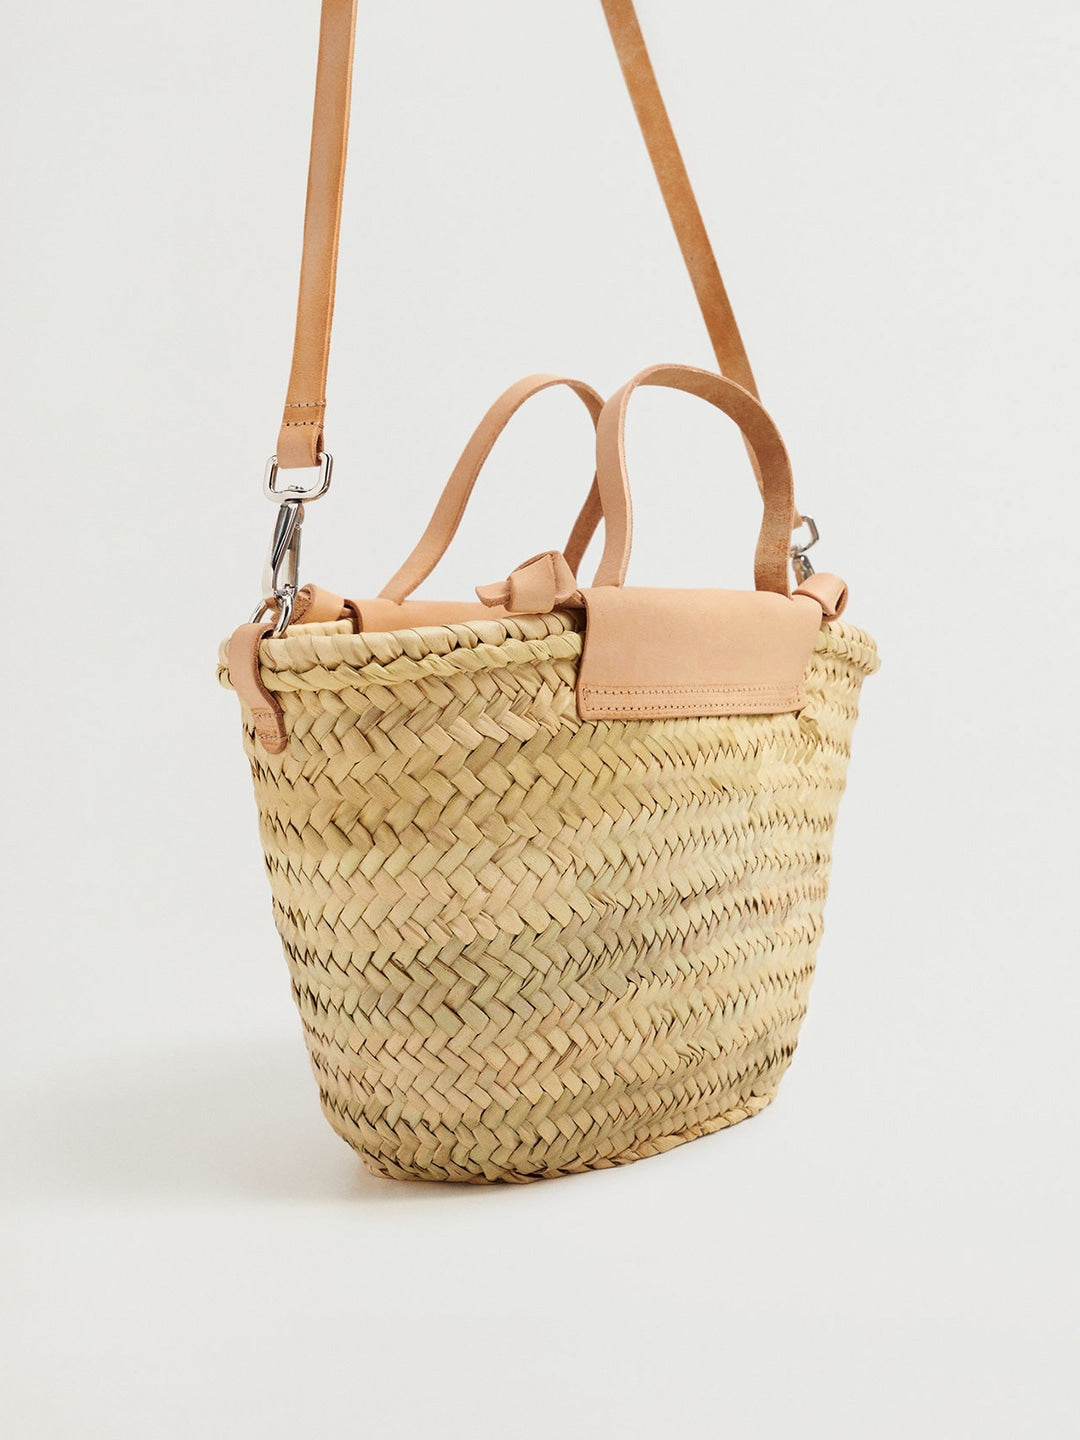 22682fc9-d80a-48ec-9840-71f80fc9ab151631524756039-MANGO-Beige-Basket-Weave-Textured-Handcrafted-Sustainable-Ha-3